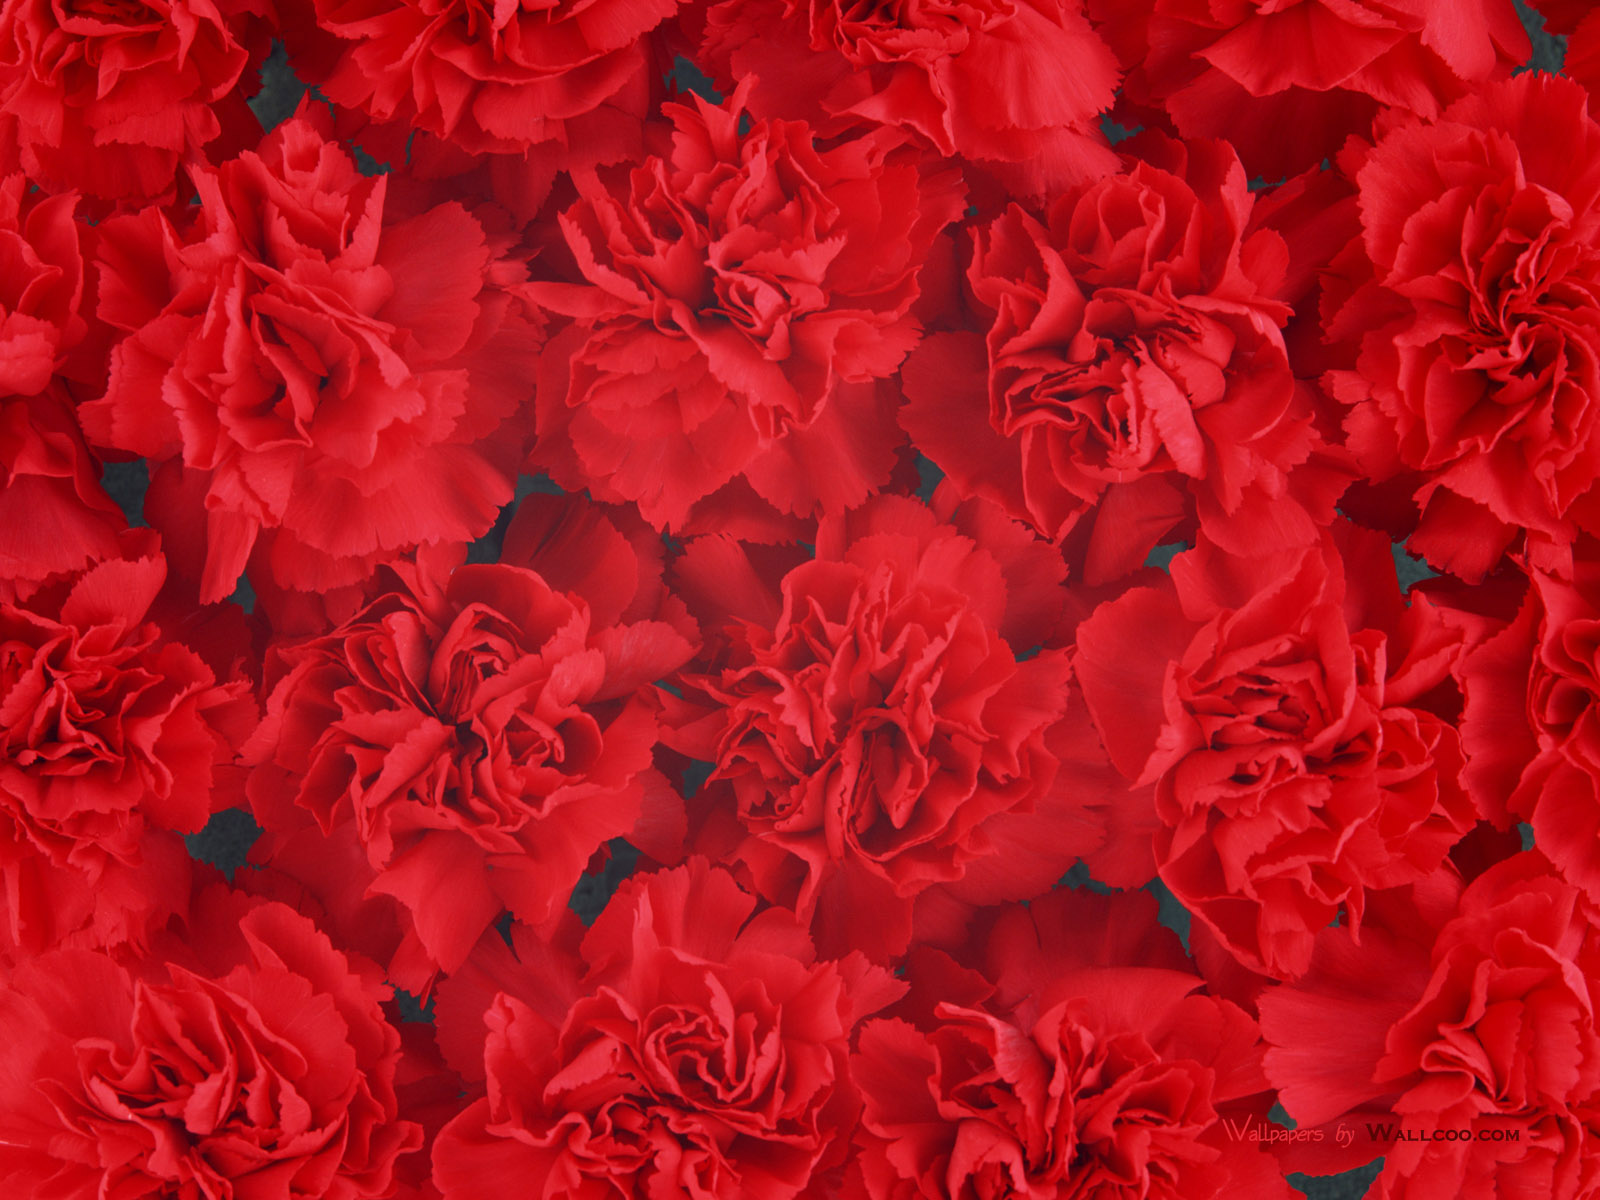 Dense Red Carnation Flowers Background Wallpapers Hd 1600x1200px